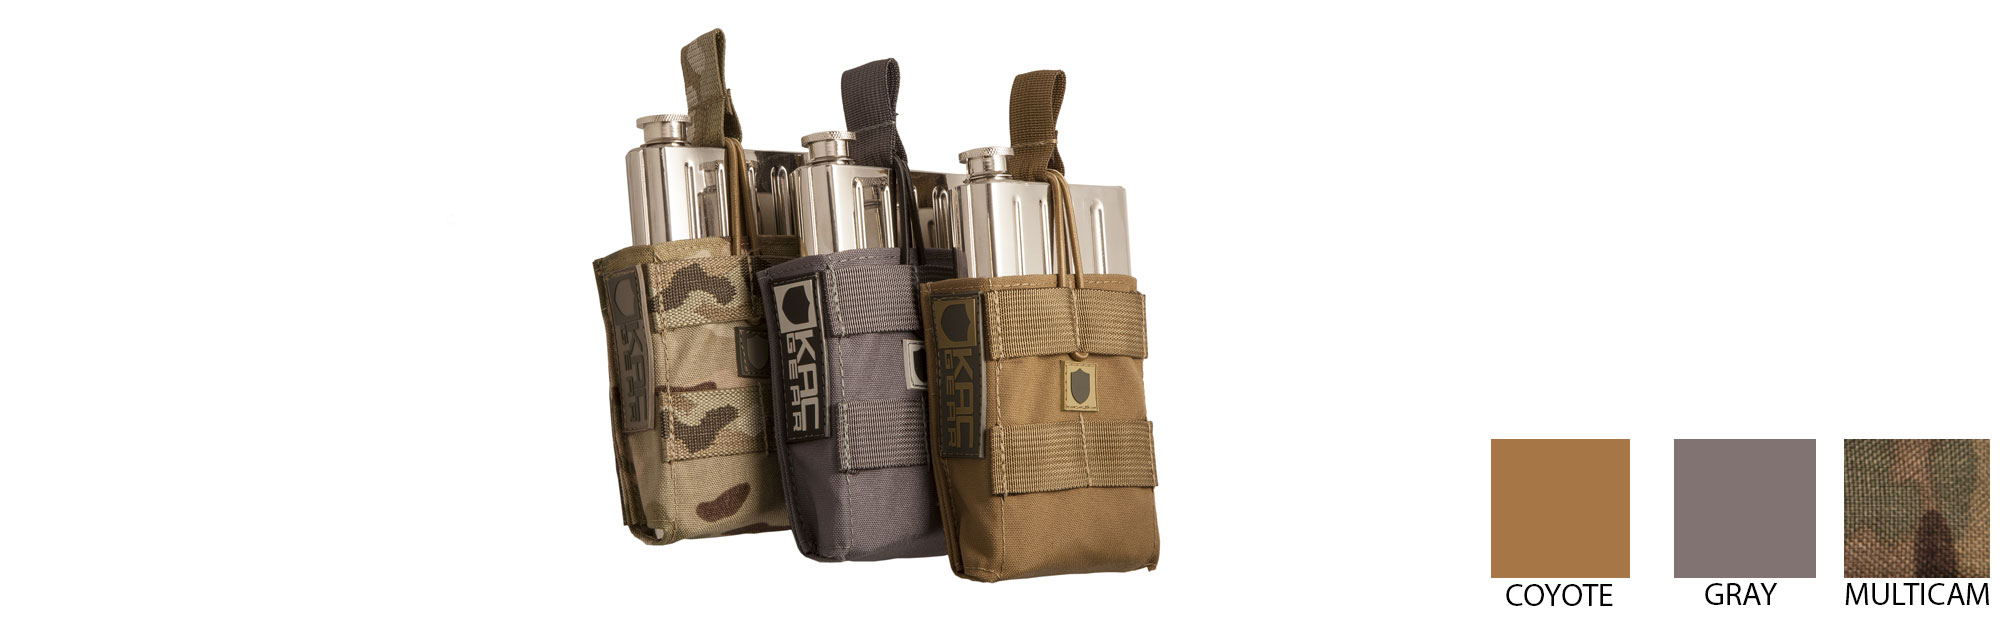 SR-25 Magazine Flask and Pouch - Knight's Armament